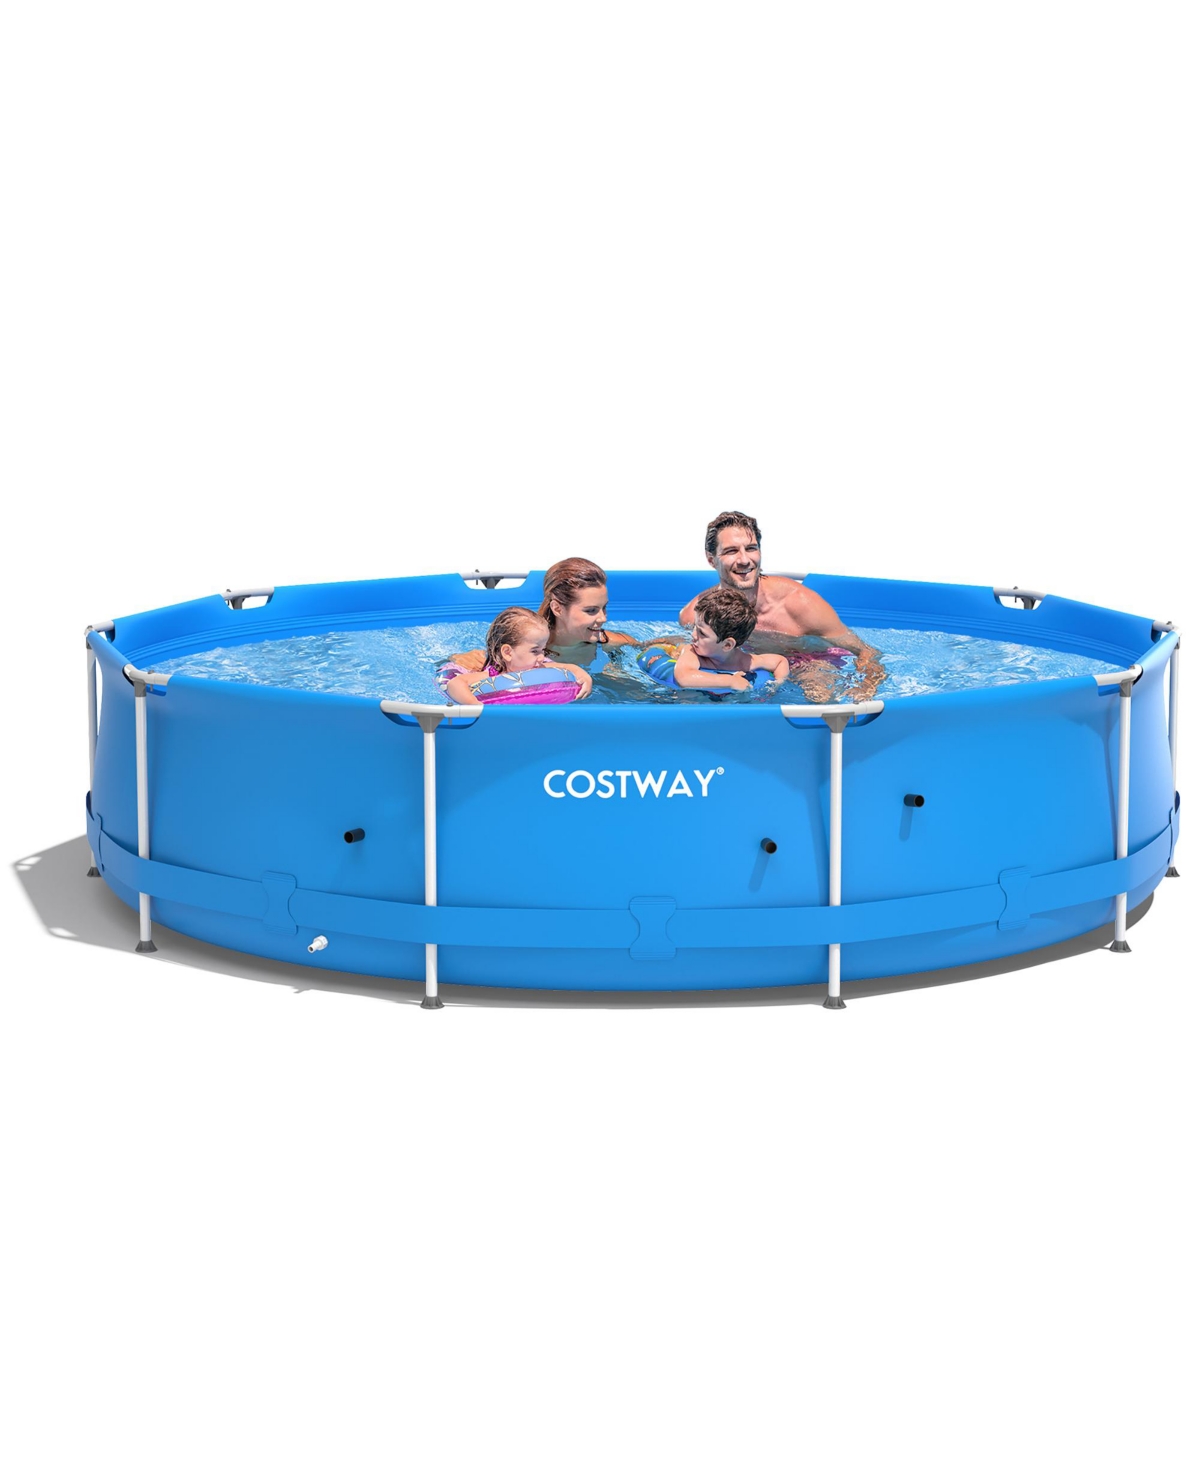 Round Above Ground Swimming Pool Patio Frame Pool W/ Pool Cover Iron Frame - Blue